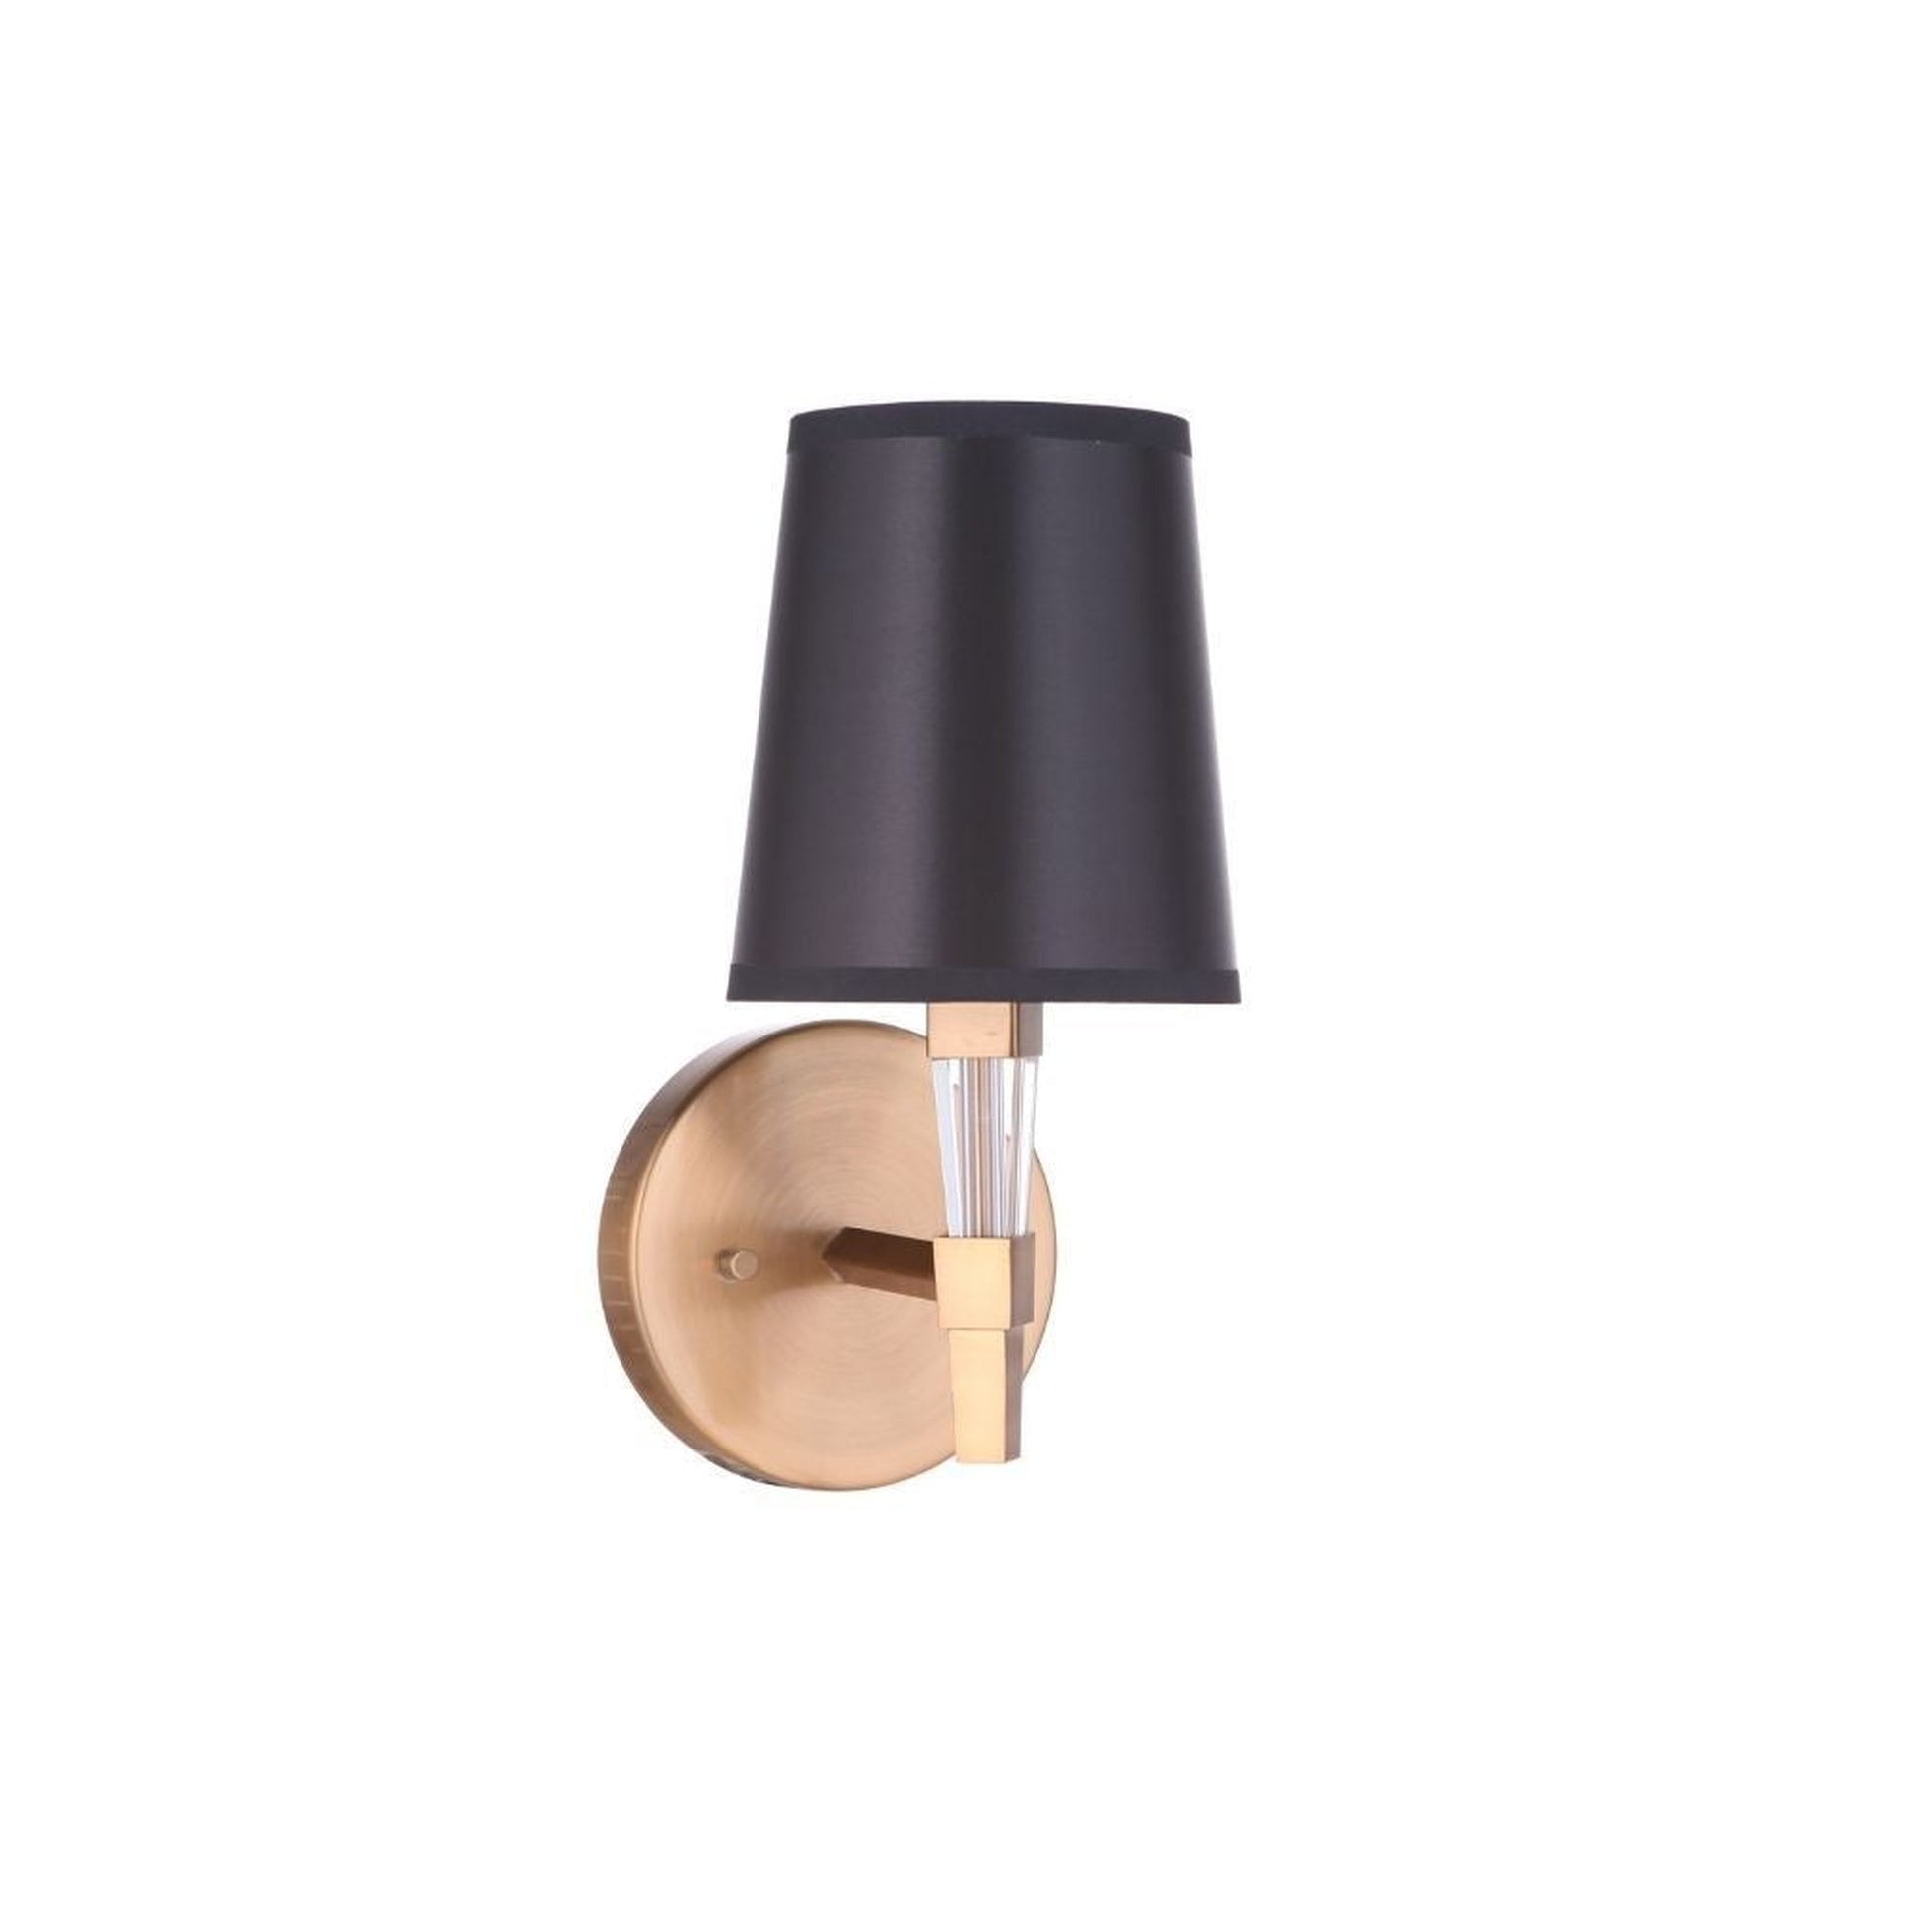 Craftmade Tarryn 6" x 12" 1-Light Satin Brass Wall Sconce With Black and Soft Gold Fabric Shade